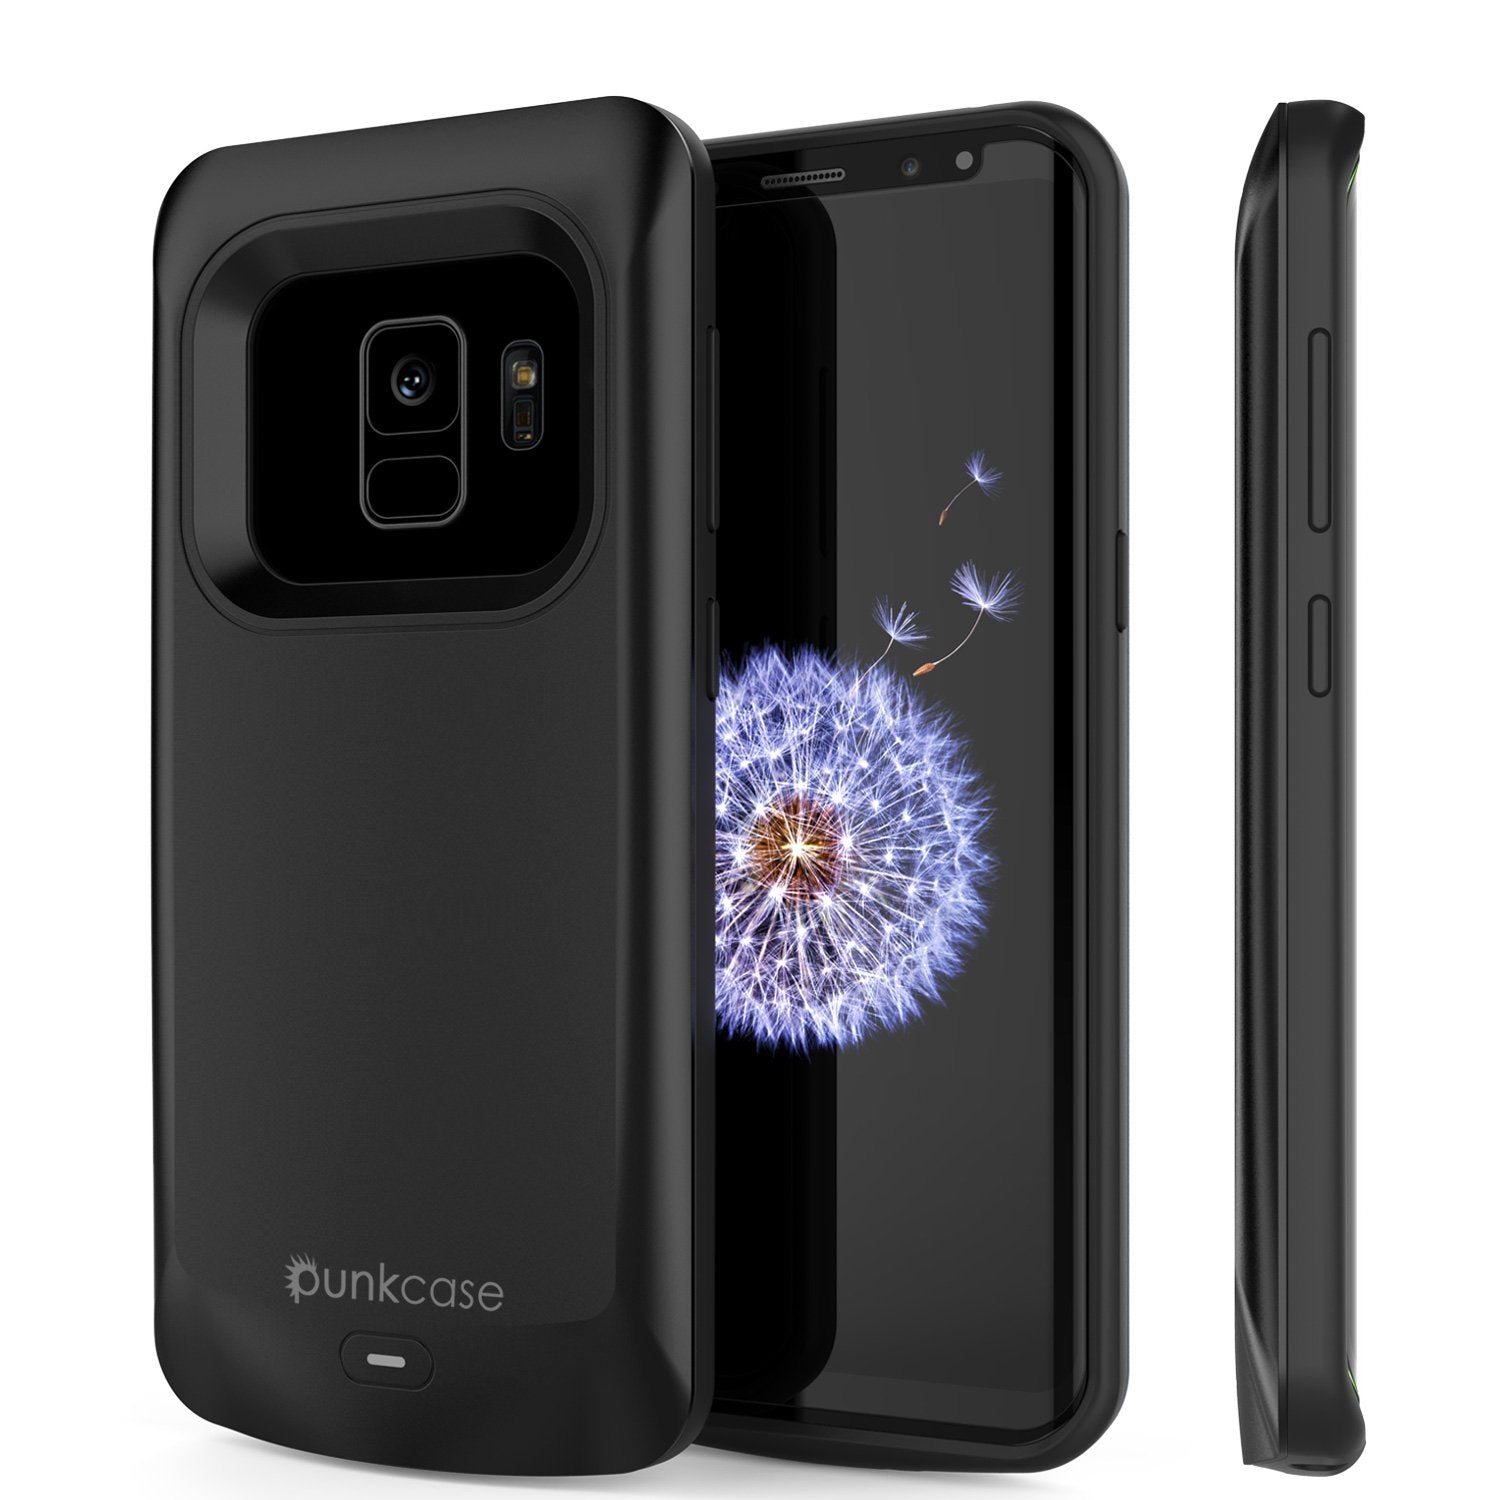 Galaxy S9 Battery Case, PunkJuice 5000mAH Fast Charging Power Bank W/ Screen Protector | Integrated USB Port | IntelSwitch | Slim, Secure and Reliable | Suitable for Samsung Galaxy S9 [Black]